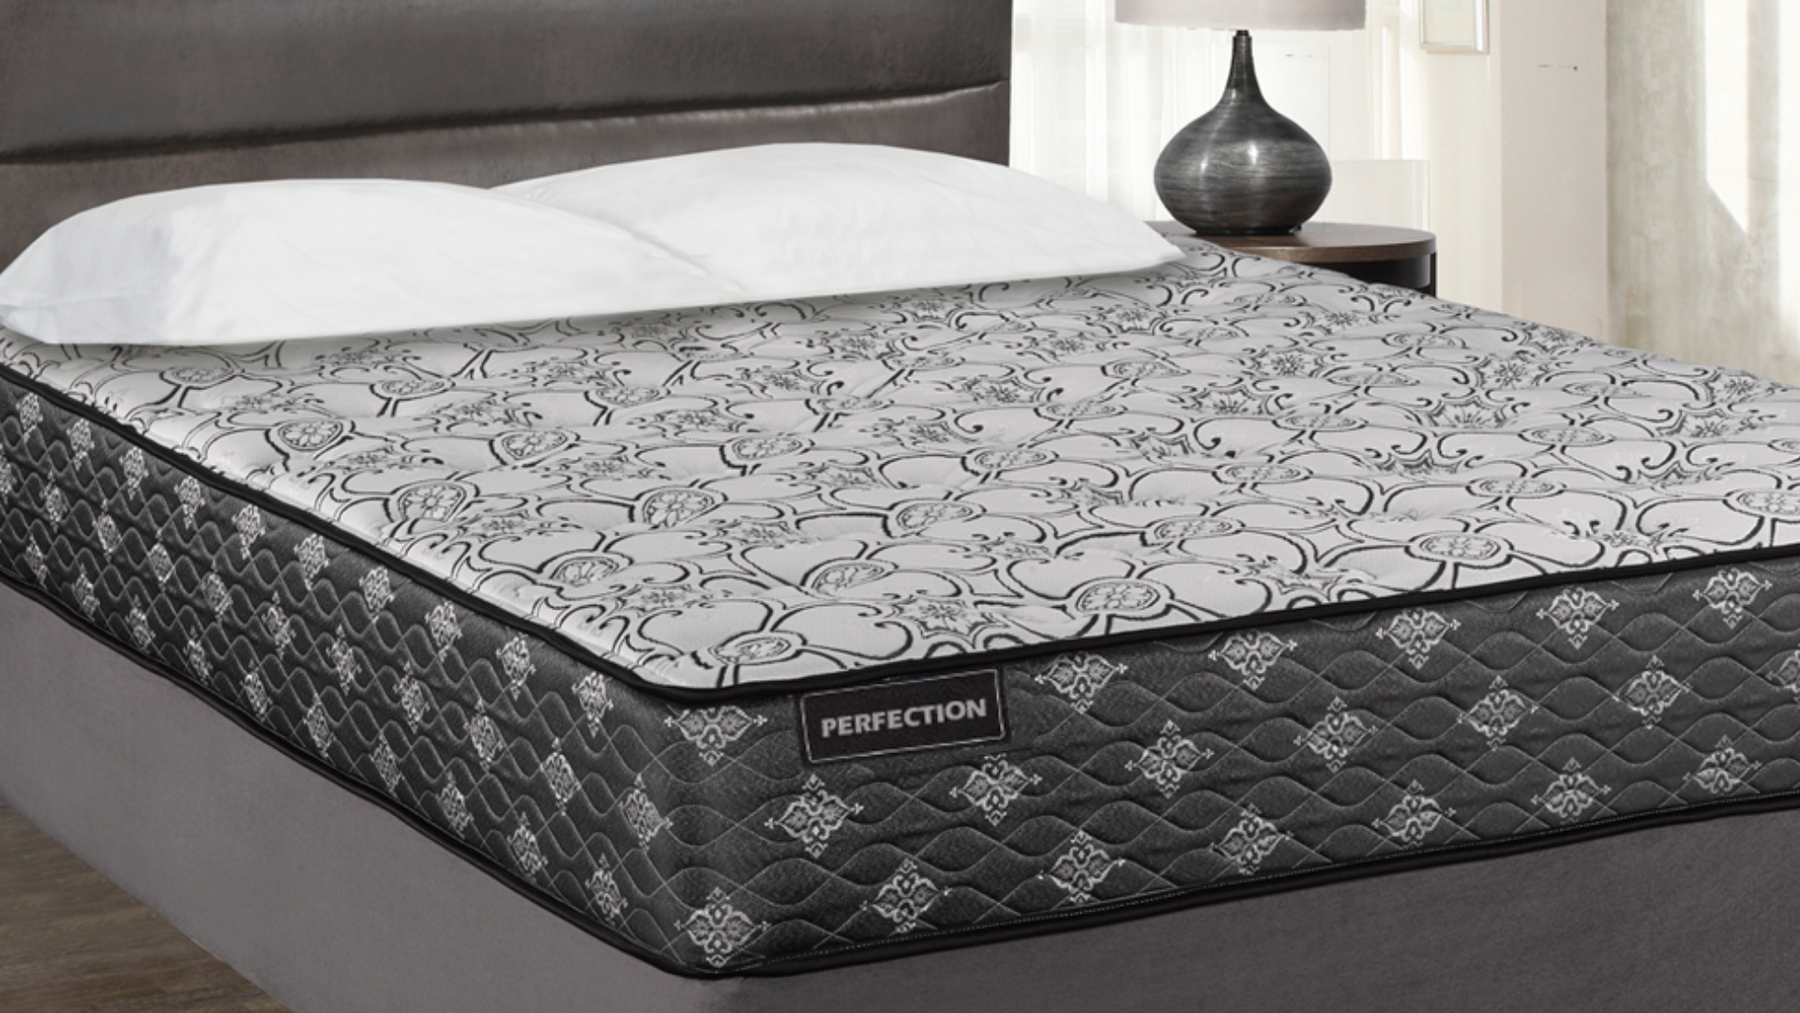 Discover the Perfection Mattress: The Key to a Good Night's Sleep